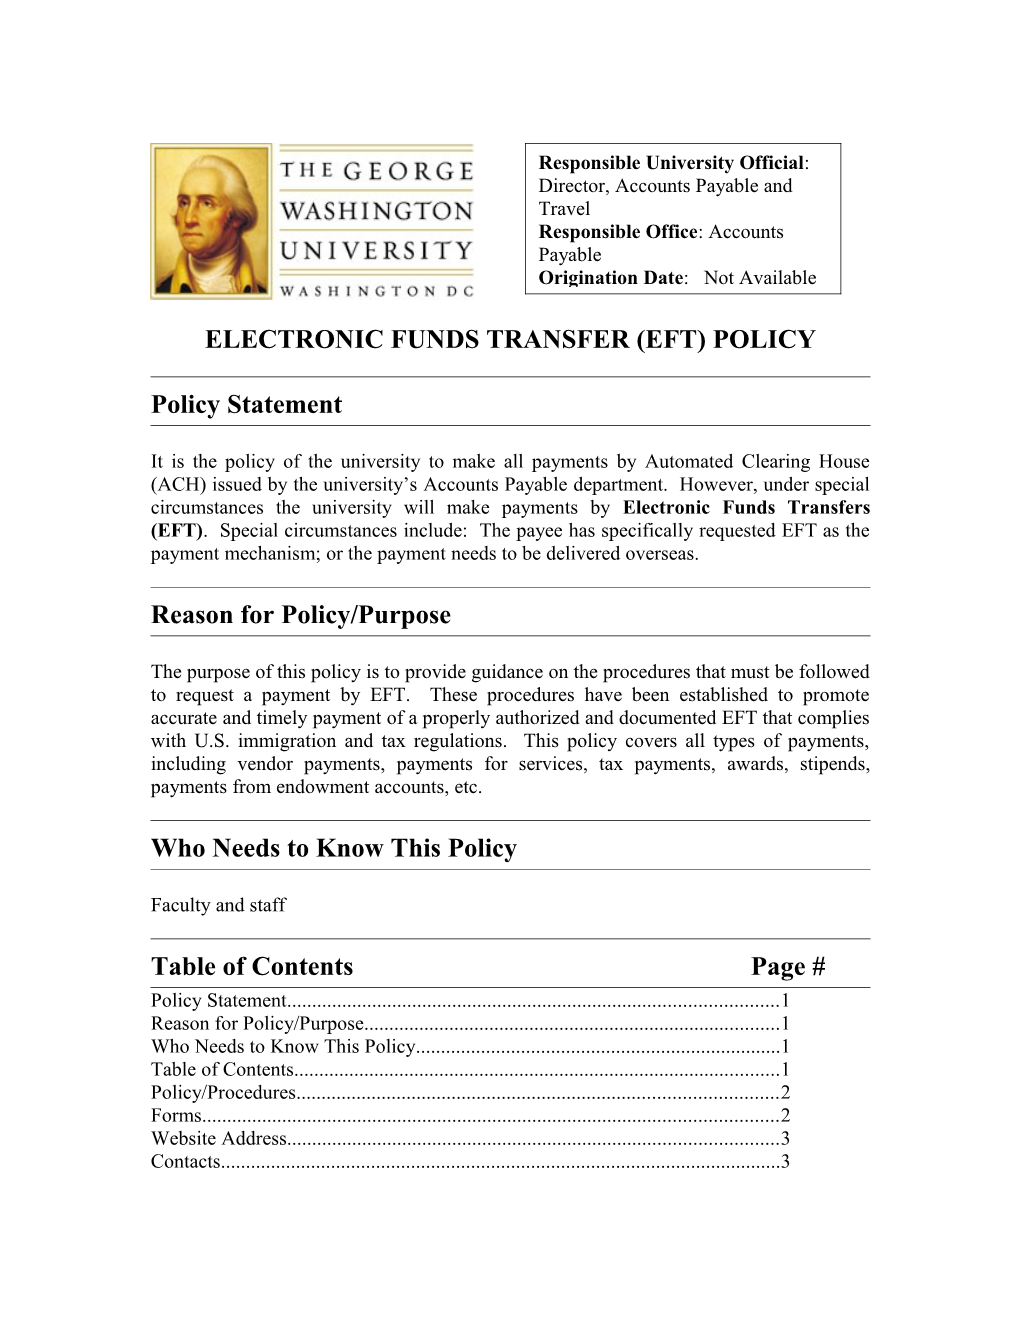 Electronic Funds Transfer (Eft) Policy